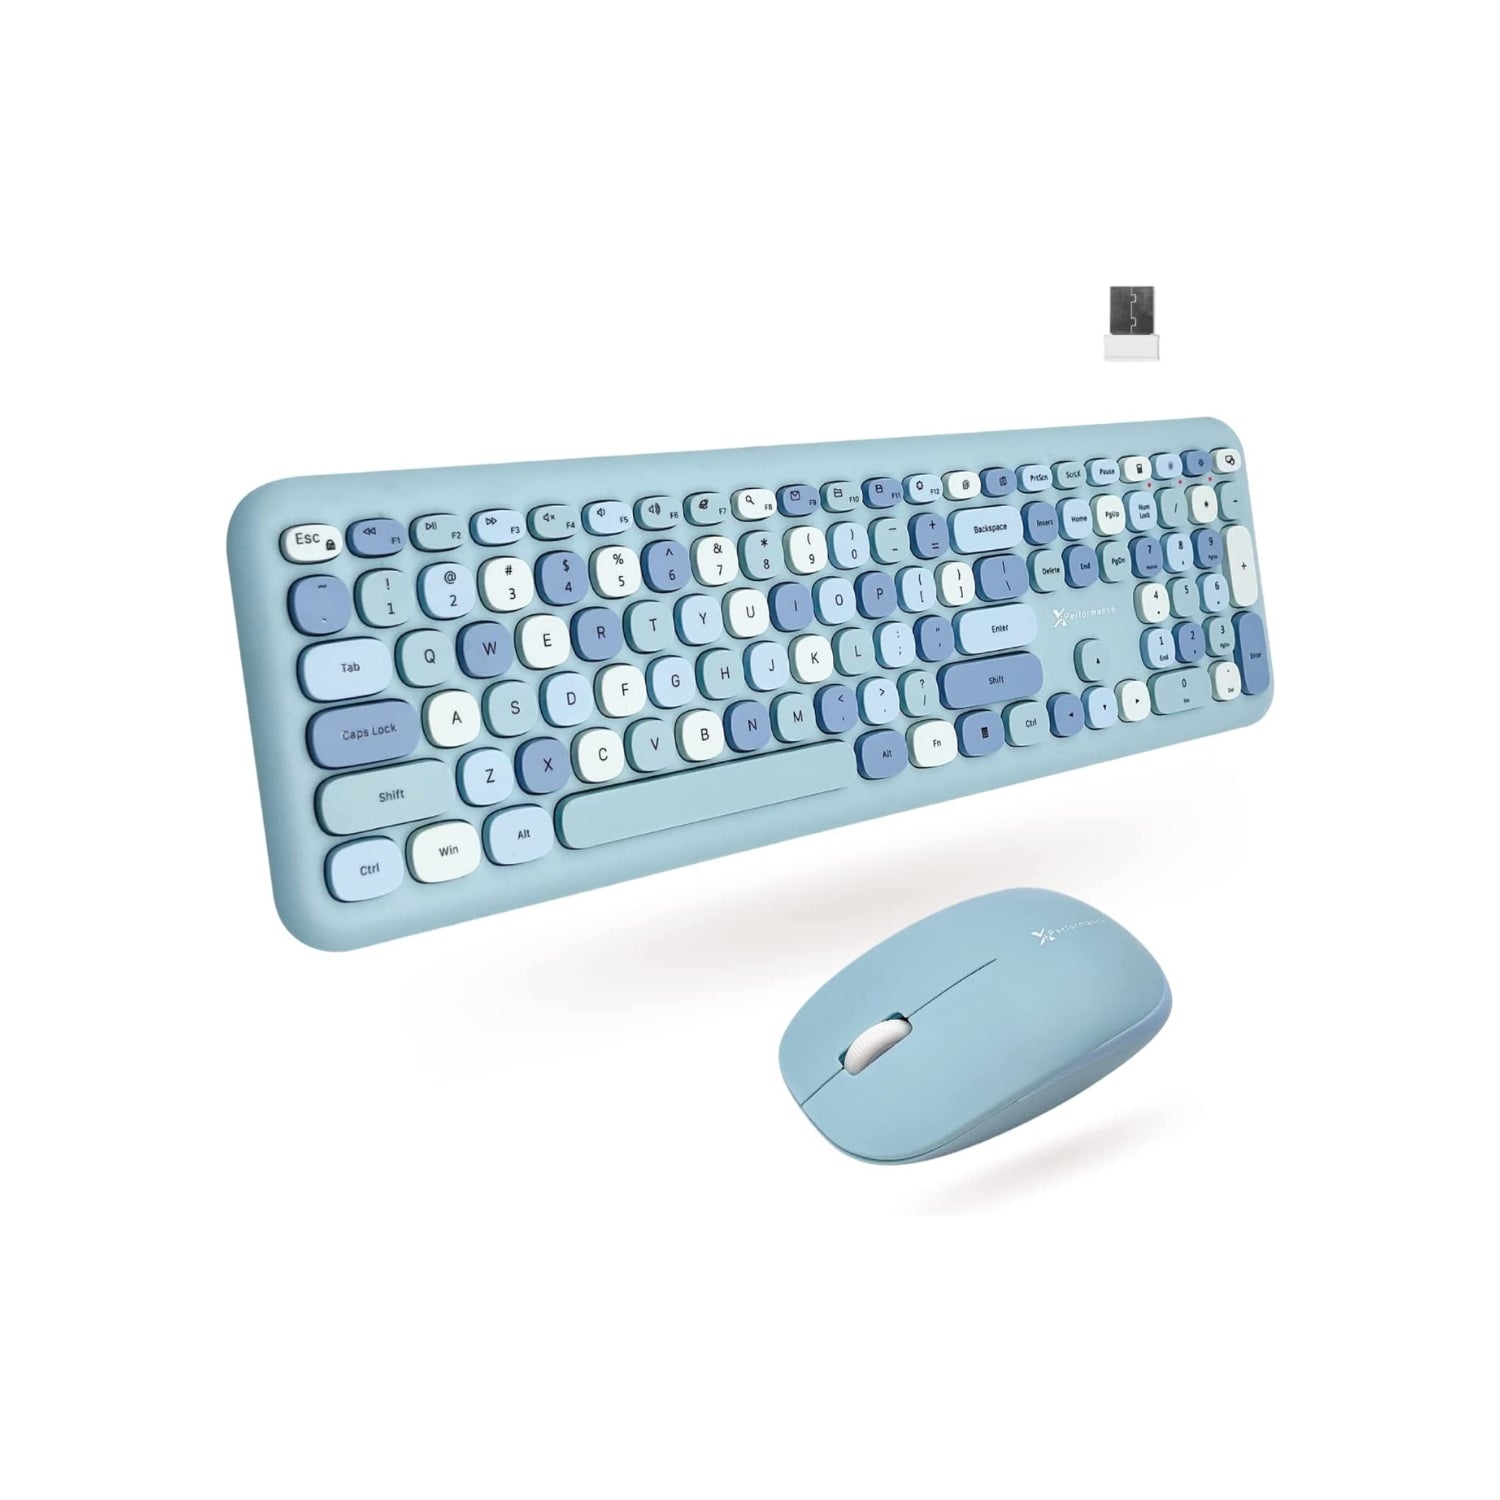 X9 Performance Cute Keyboard and Mouse Combo - 2.4G Wireless Connectivity